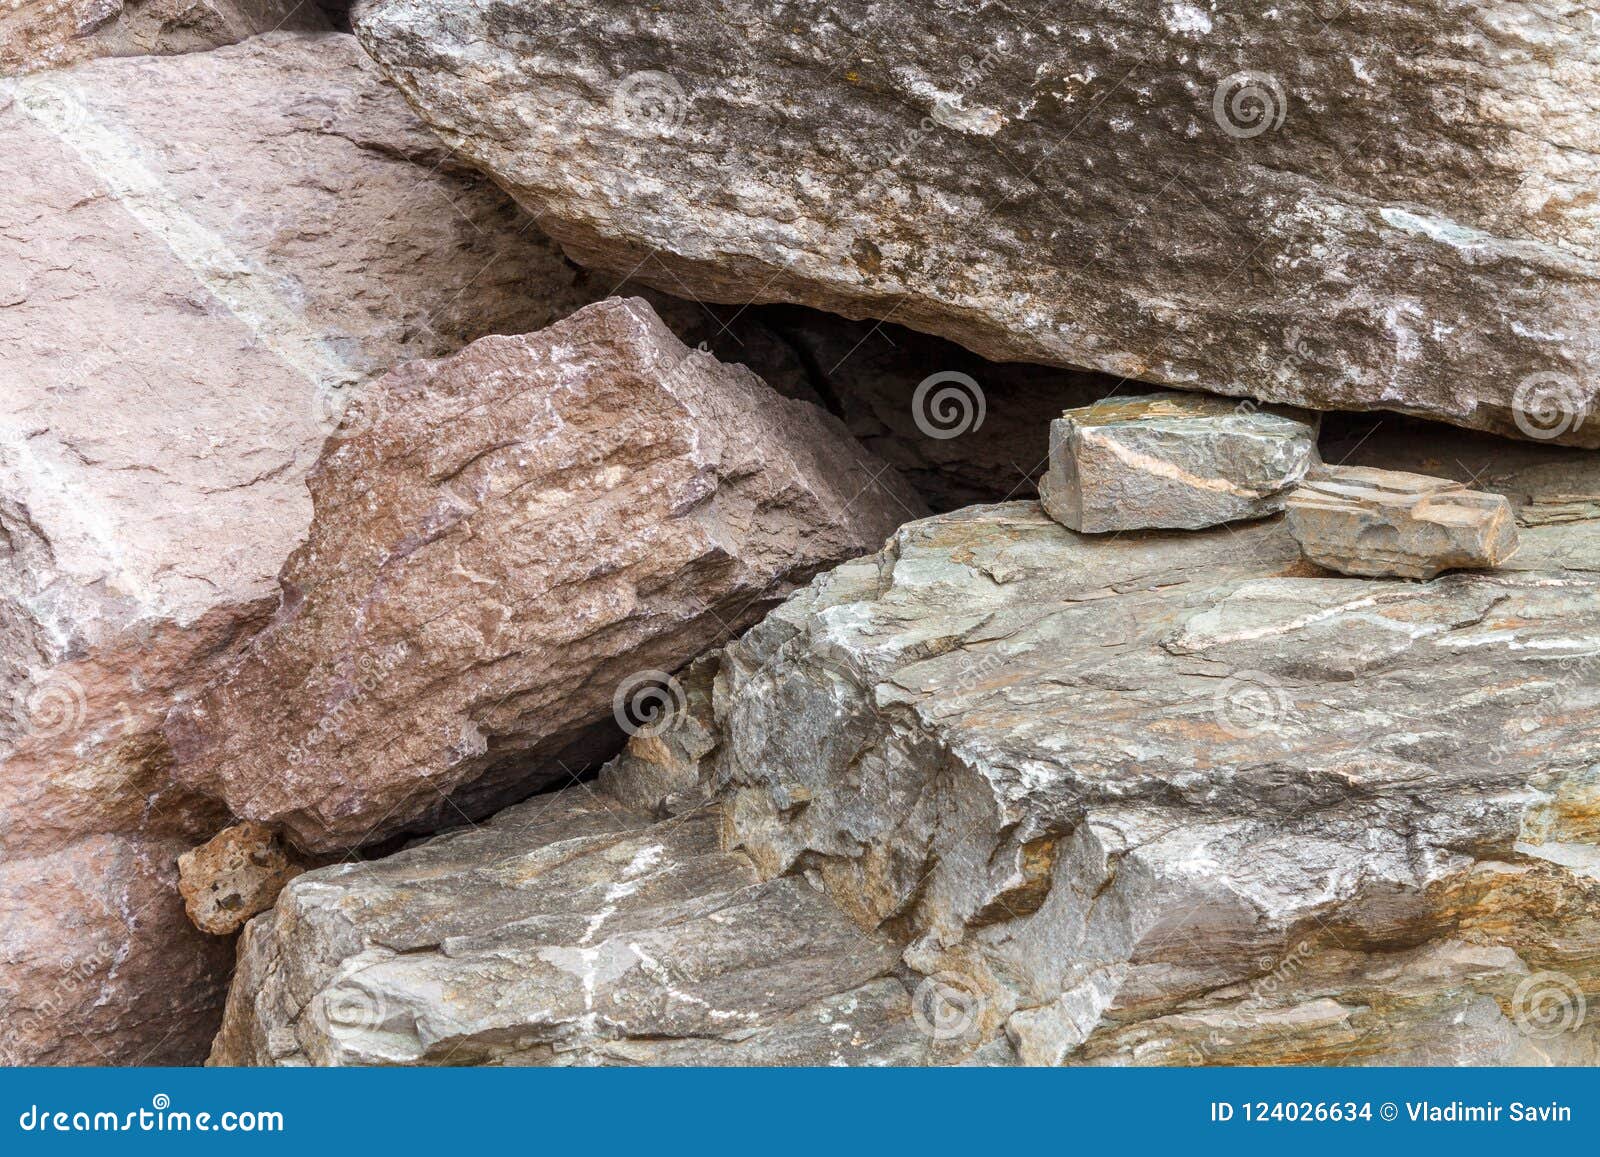 A Group Of Decorative Stones On Pebbles Stock Photo Image